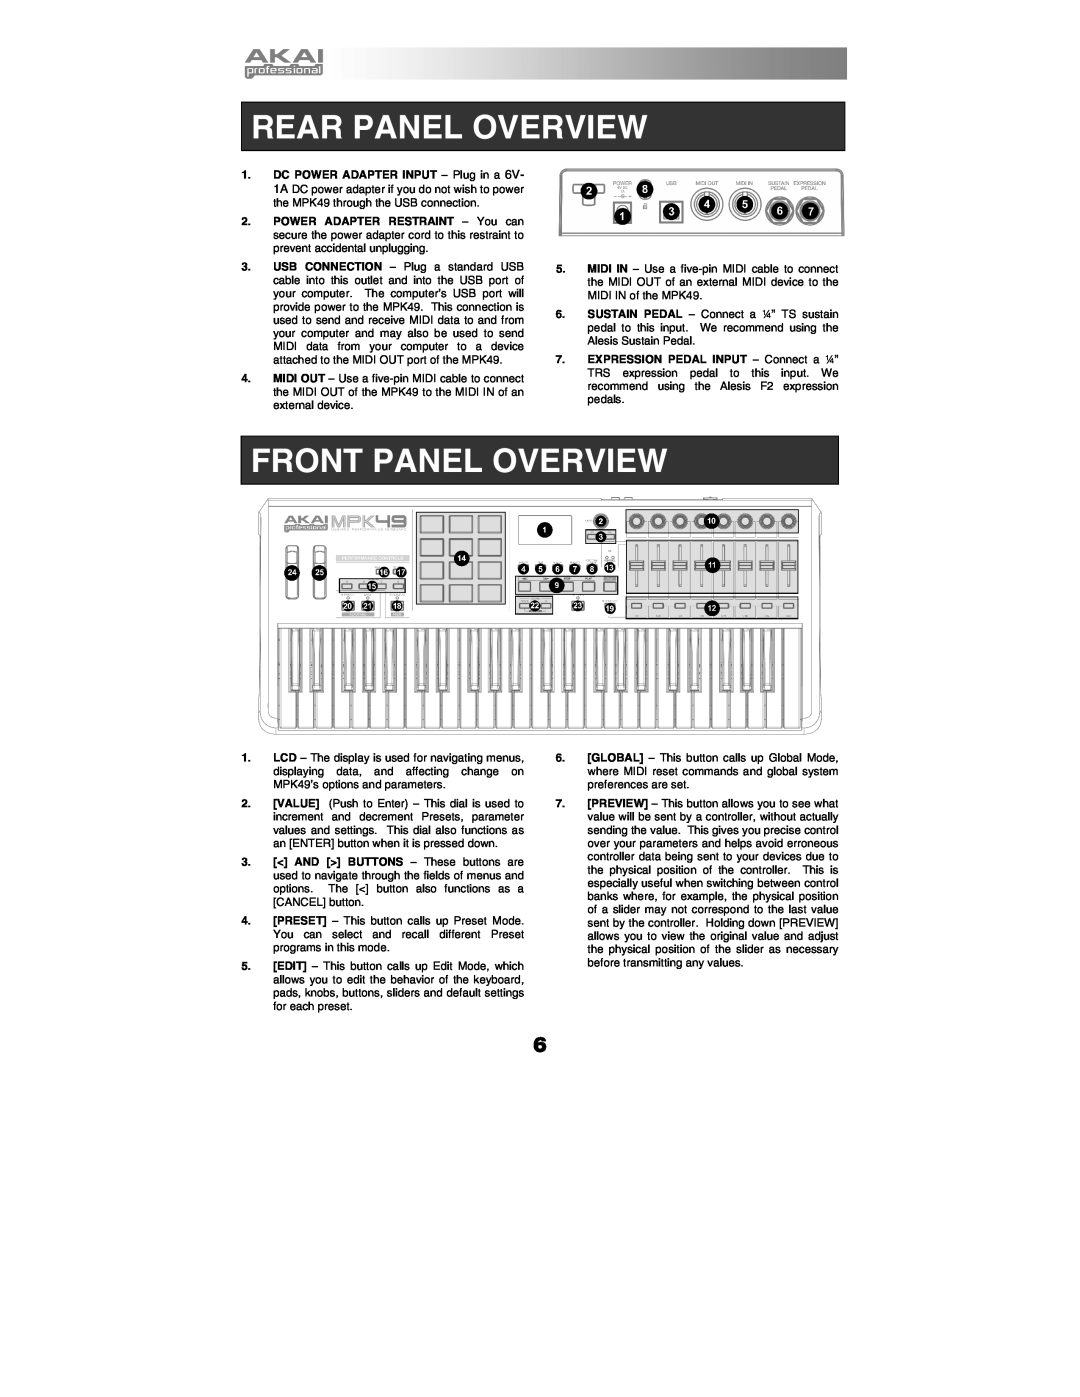 Akai MPK49 quick start manual Rear Panel Overview, Front Panel Overview 